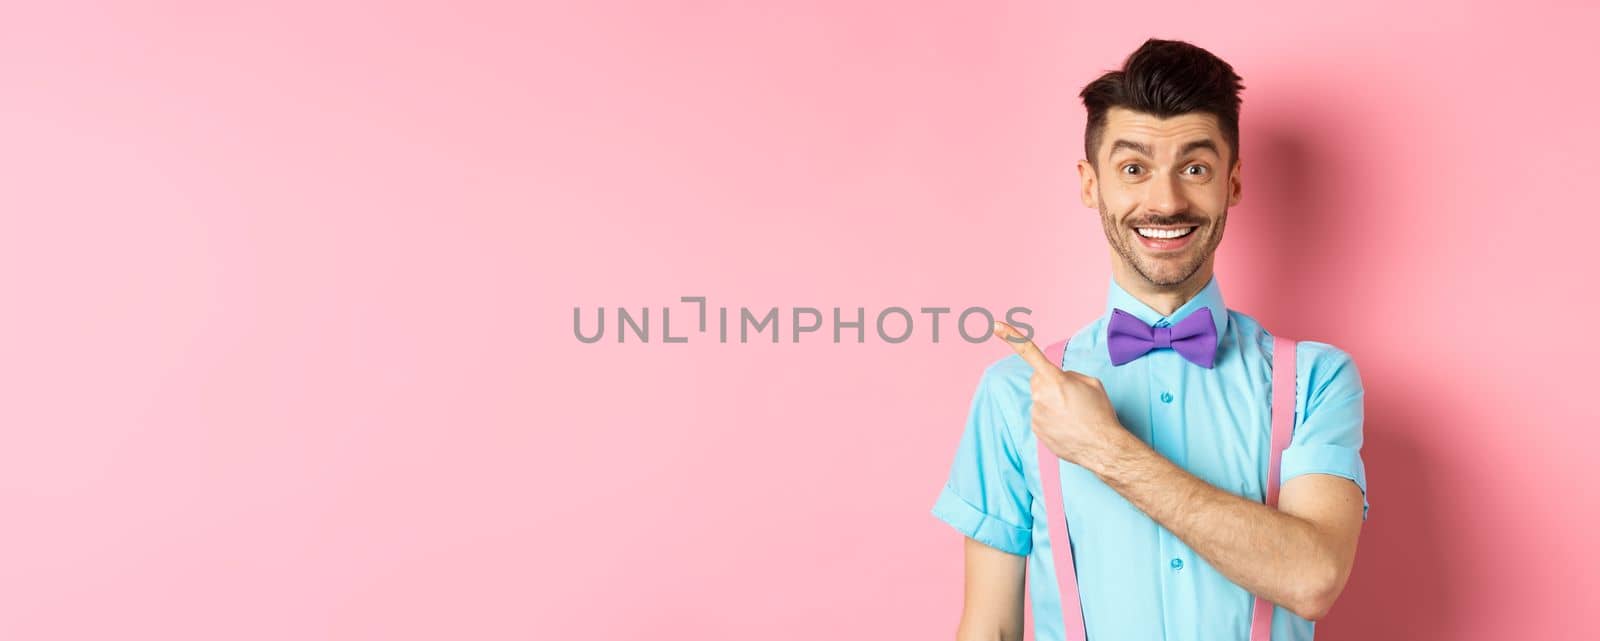 Portrait of handsome happy man showing logo, pointing left and smiling at camera, recommending shop offer, standing on pink background.